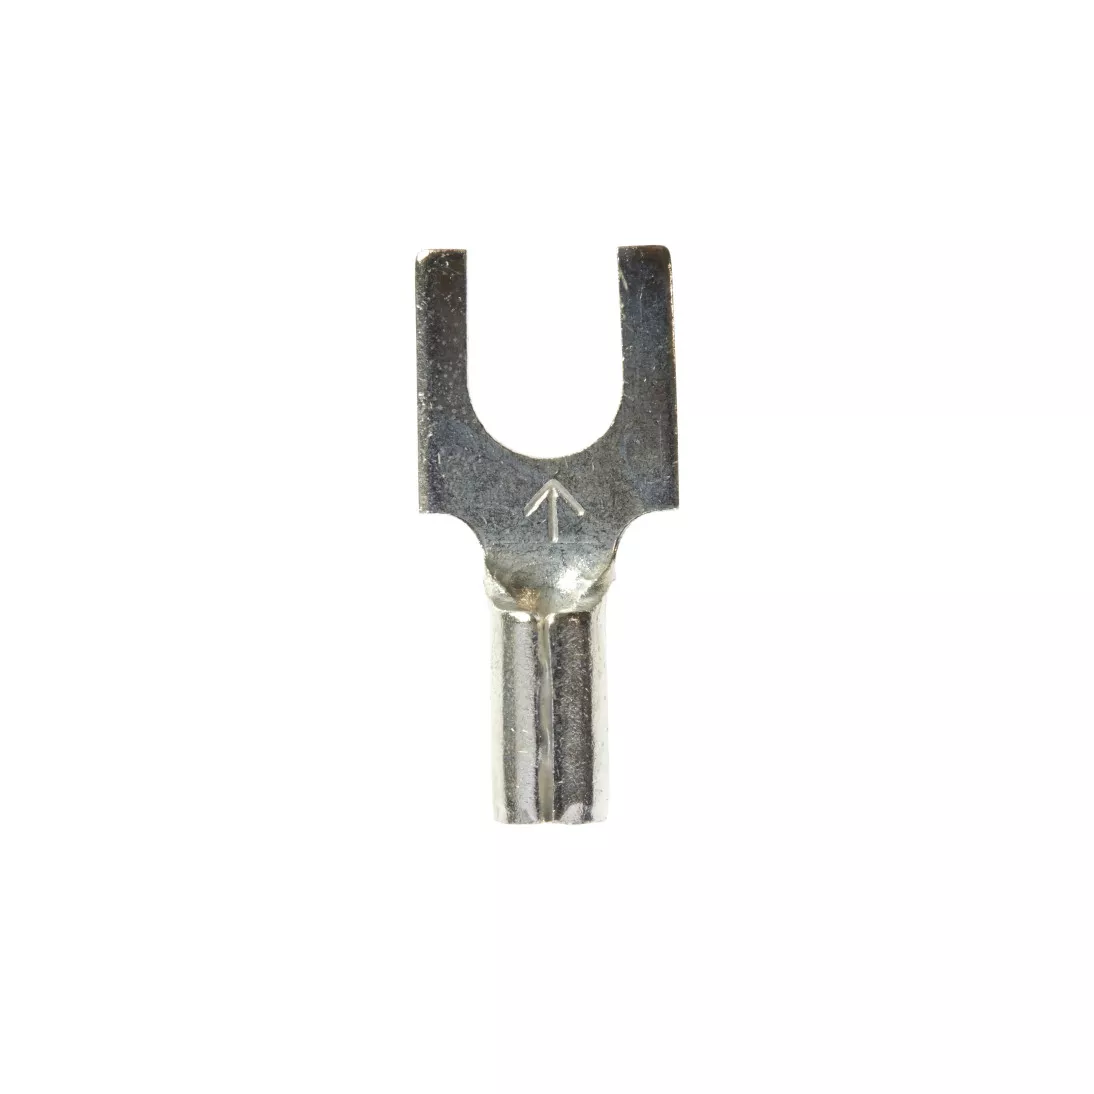 3M™ Scotchlok™ Block Fork, Non-Insulated Butted Seam MU18-8FBK, Stud
Size 8, suitable for use in a terminal block, 1000/Case